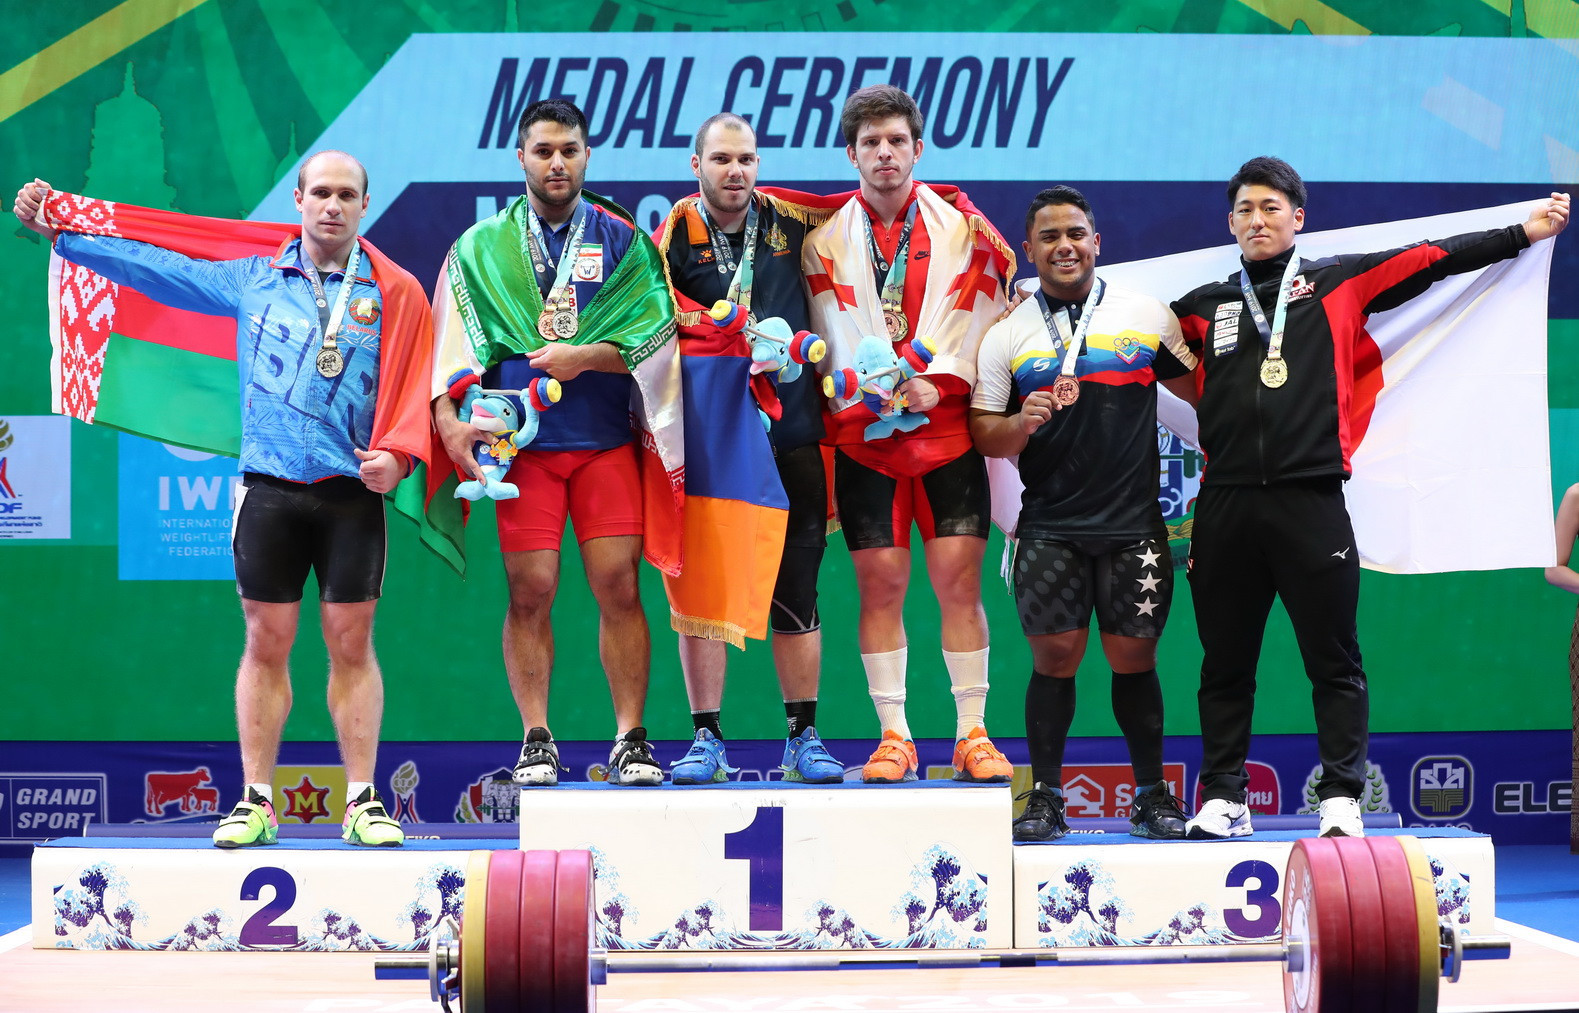 insidethegames is reporting LIVE from the IWF World Weightlifting Championships in Pattaya